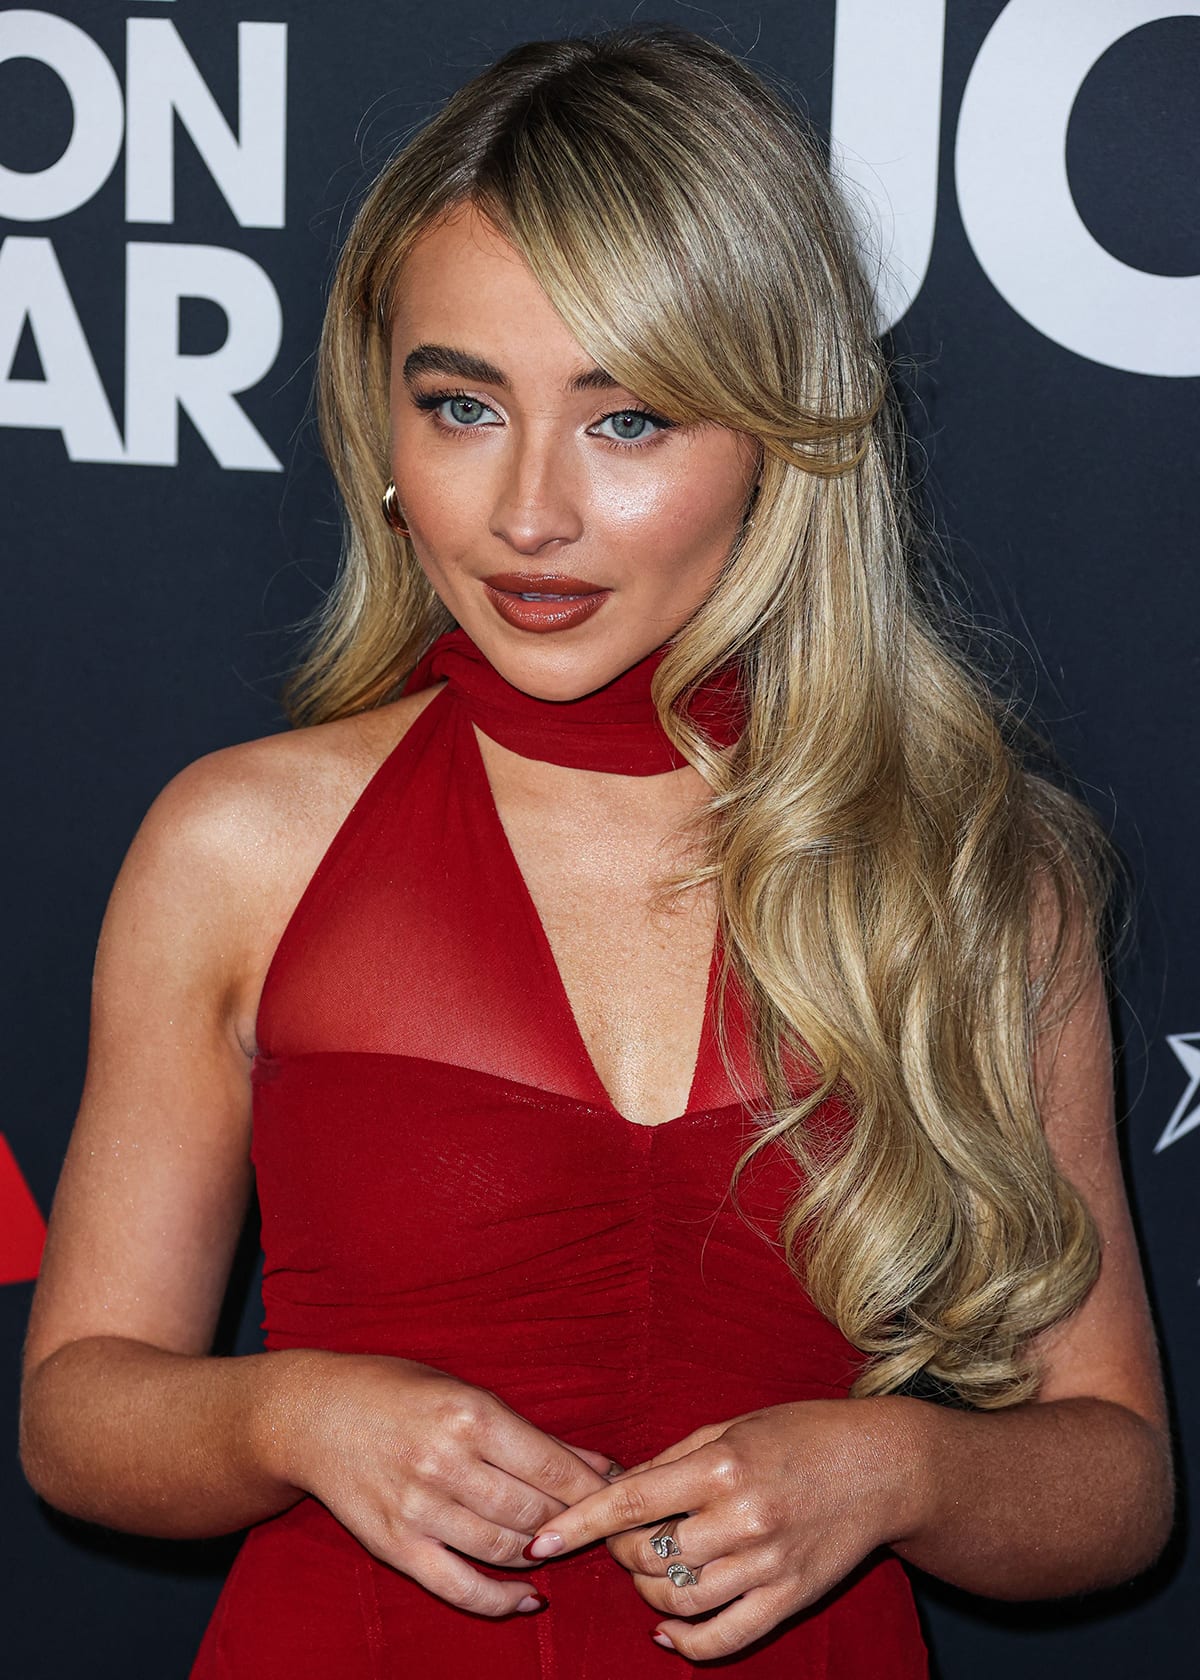 Sabrina Carpenter parts her wavy blonde hair to the side and highlights her striking features with rosy makeup